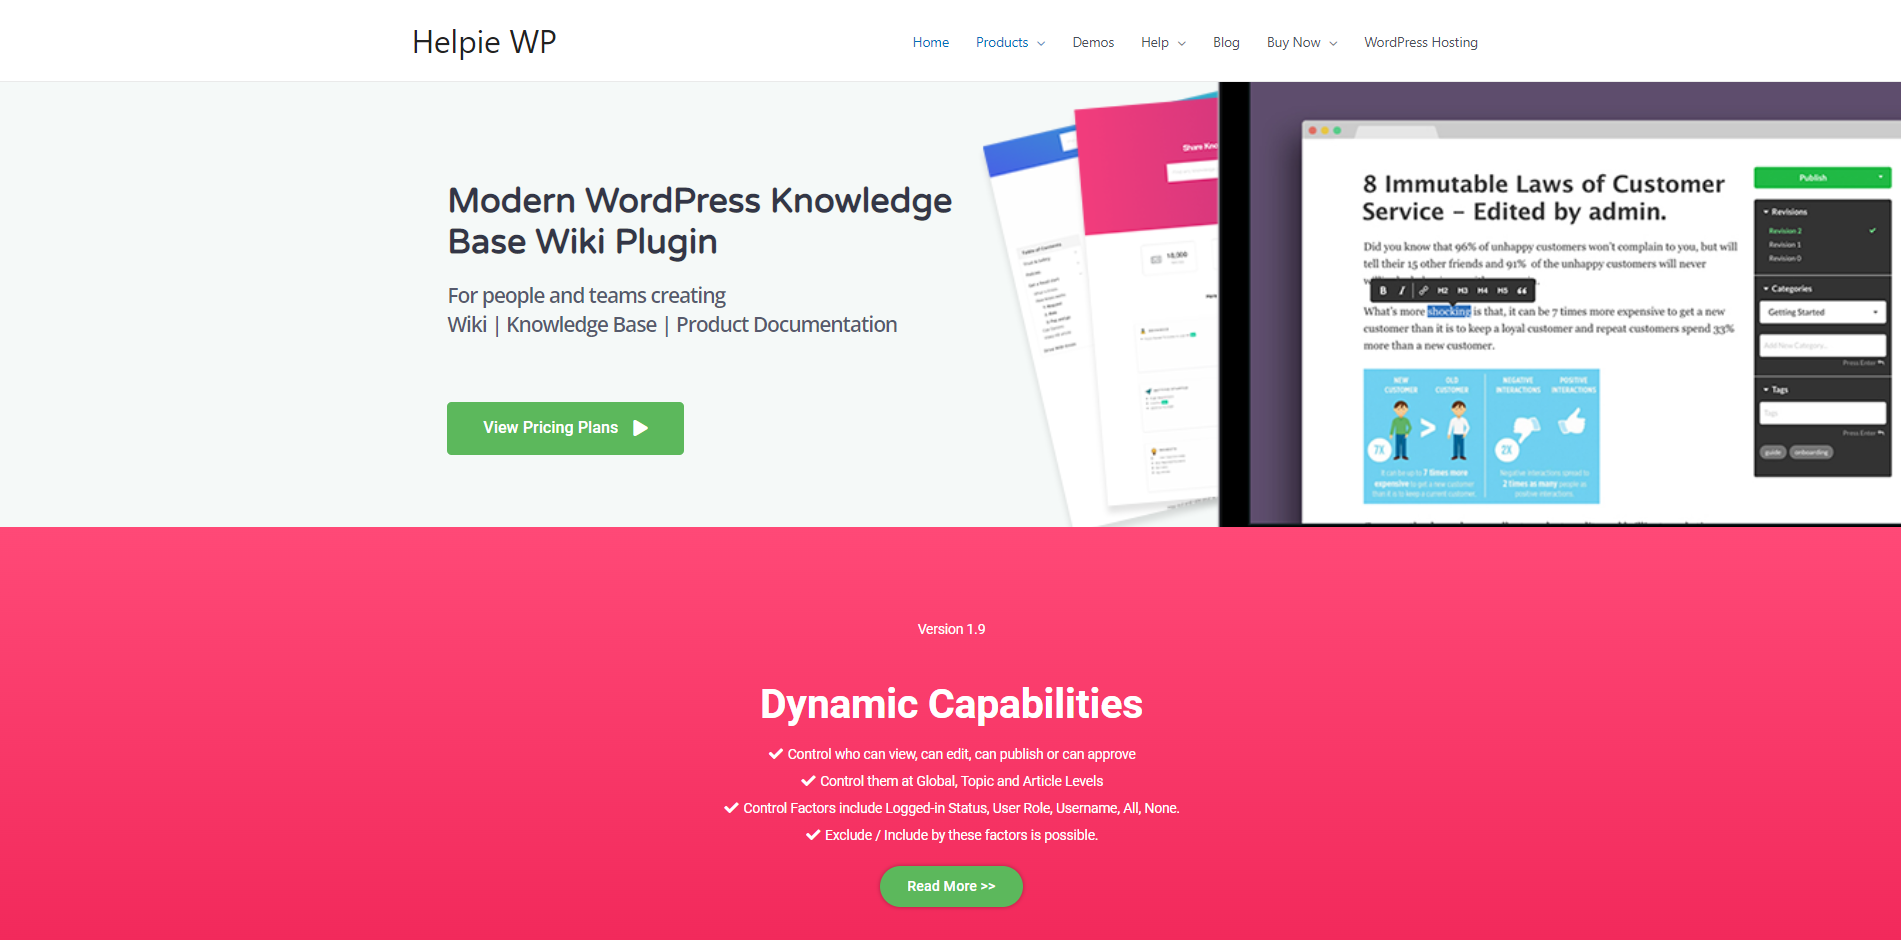 Helpie WP WordPress Knowledge Base Wiki Plugin with Frontend Editing